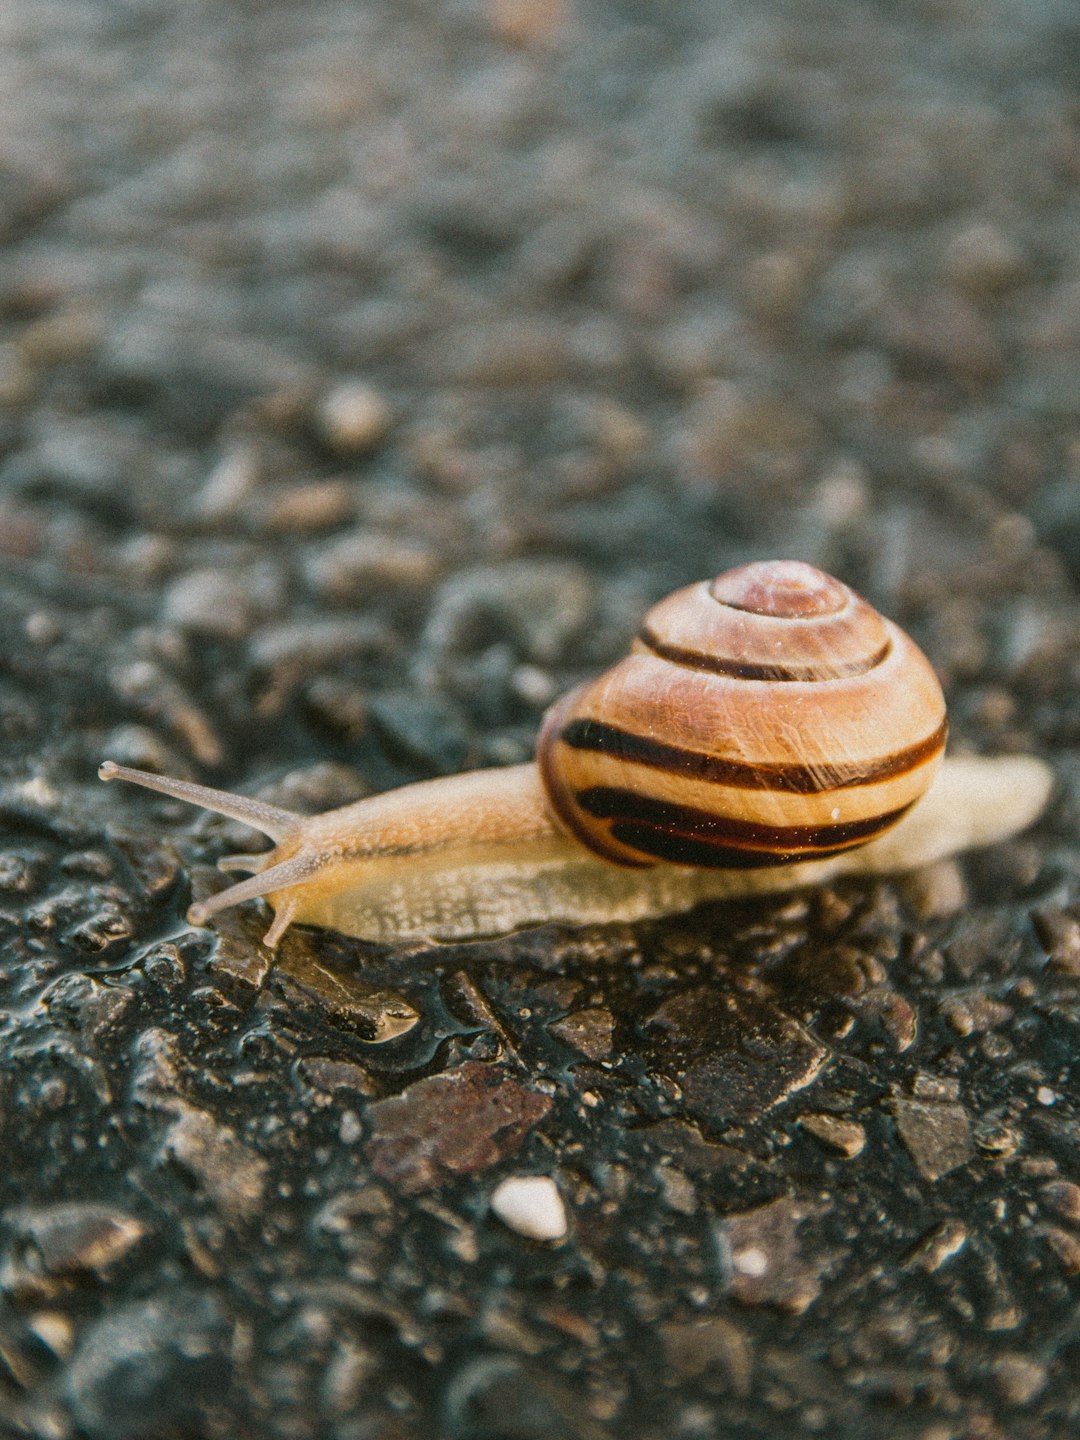 brown and white snail on gray and black marble surface